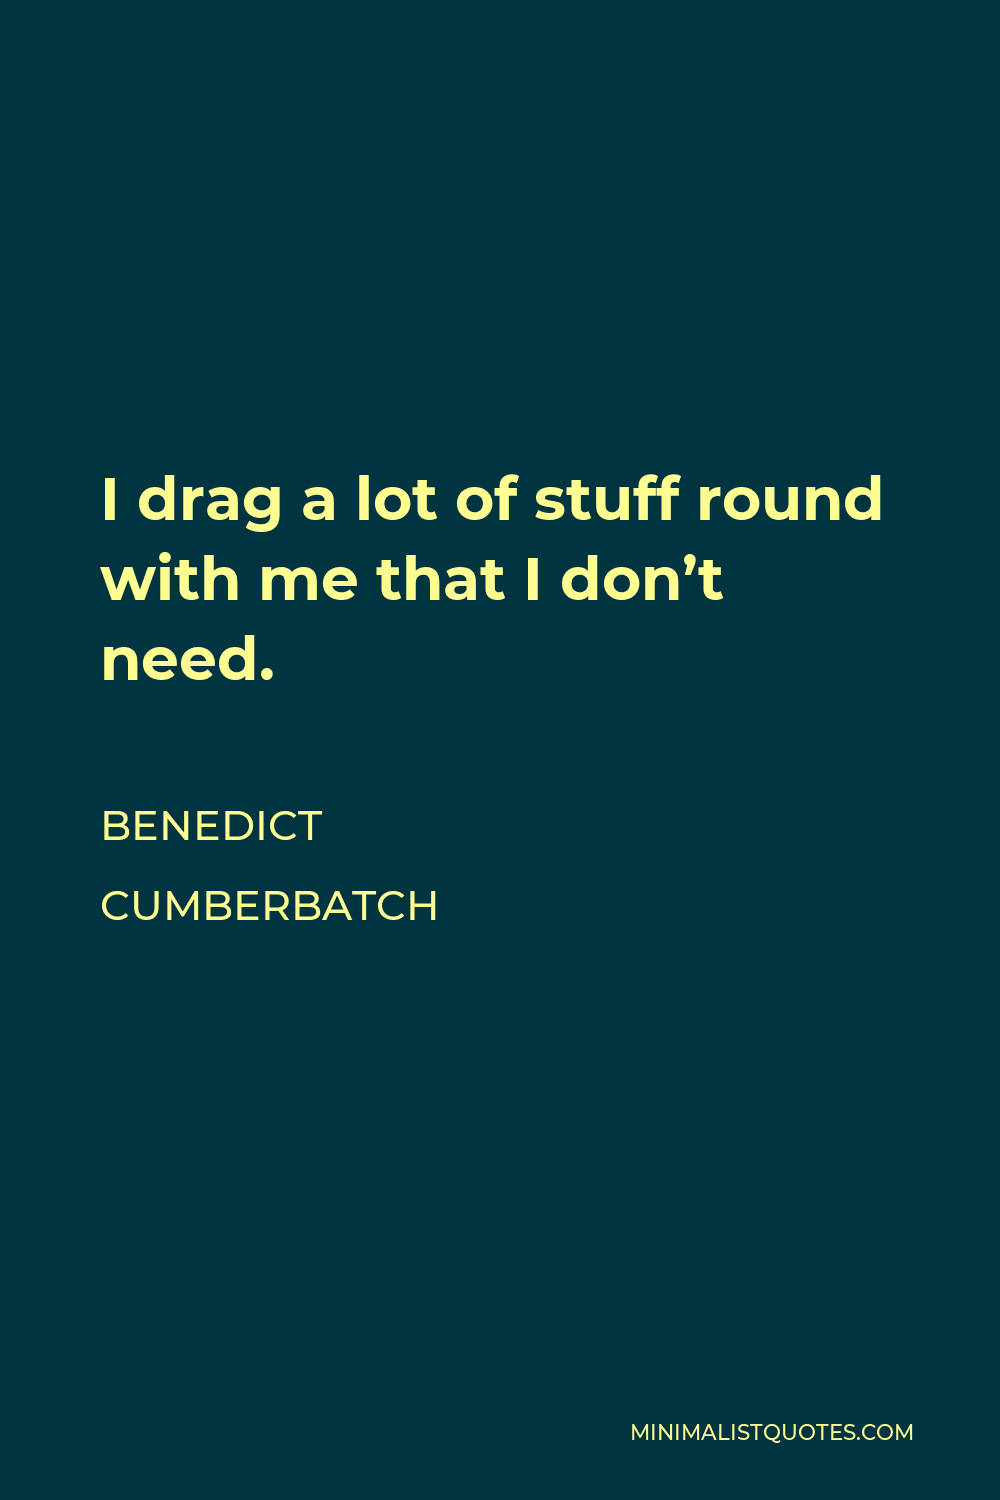 Benedict Cumberbatch Quote - I drag a lot of stuff round with me that I don’t need.